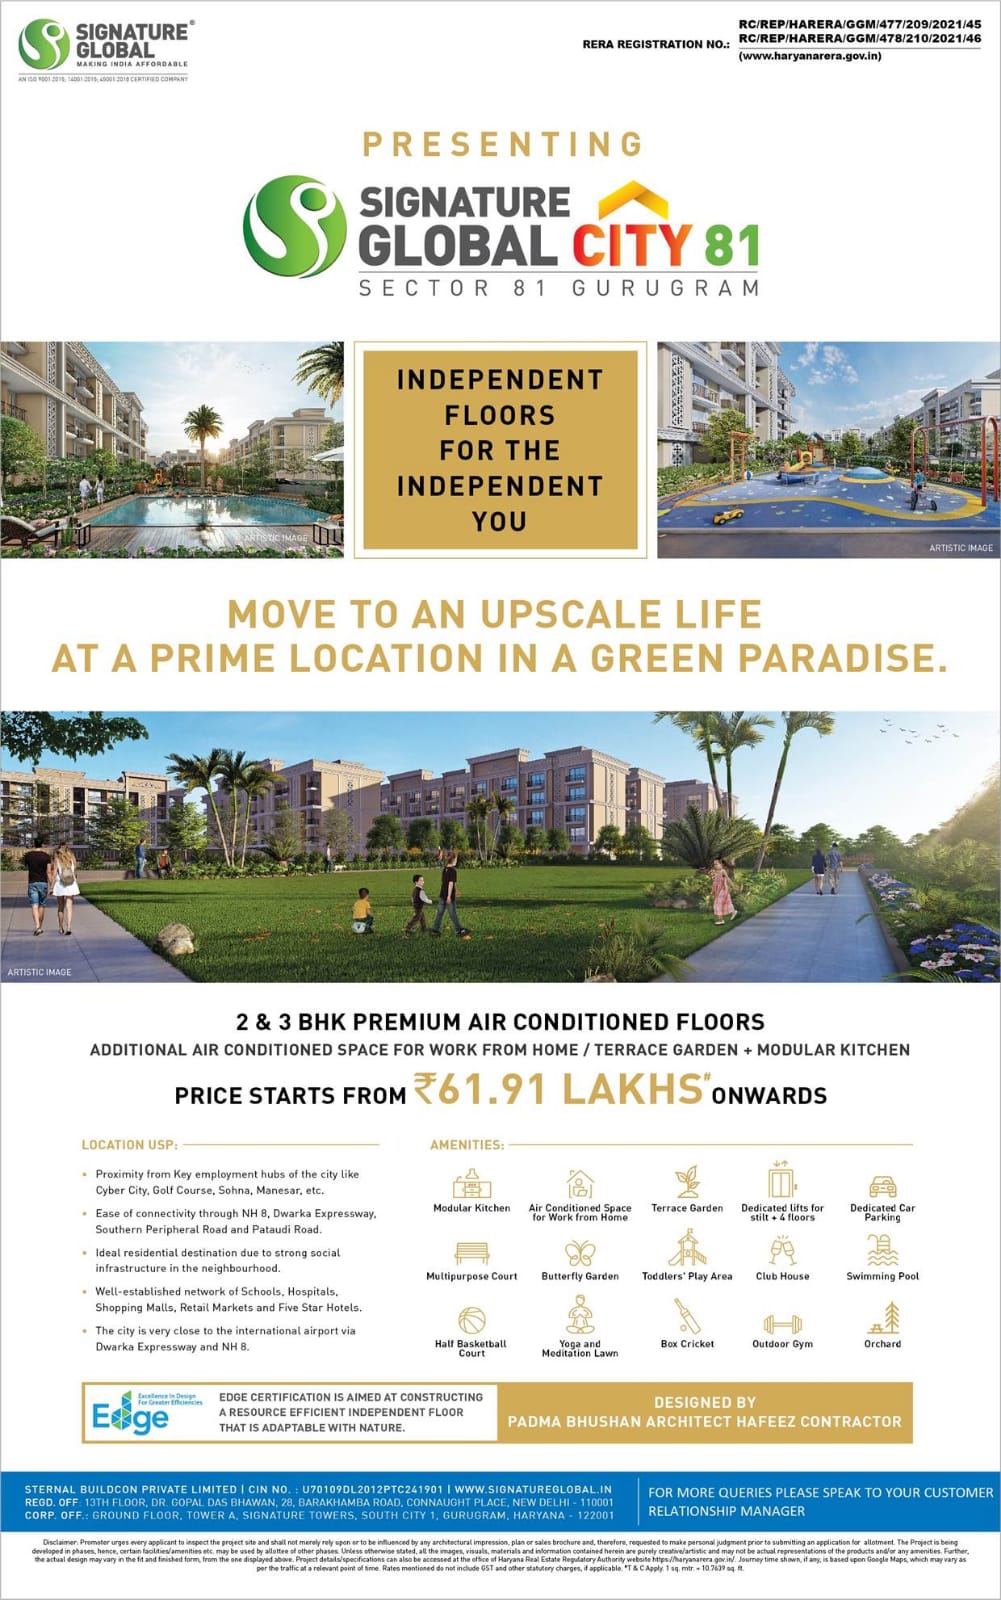 Book 2 & 3 BHK premium air conditioned floors prices Starting Rs 61.91 Lac at Signature Global City 81, Gurgaon Update